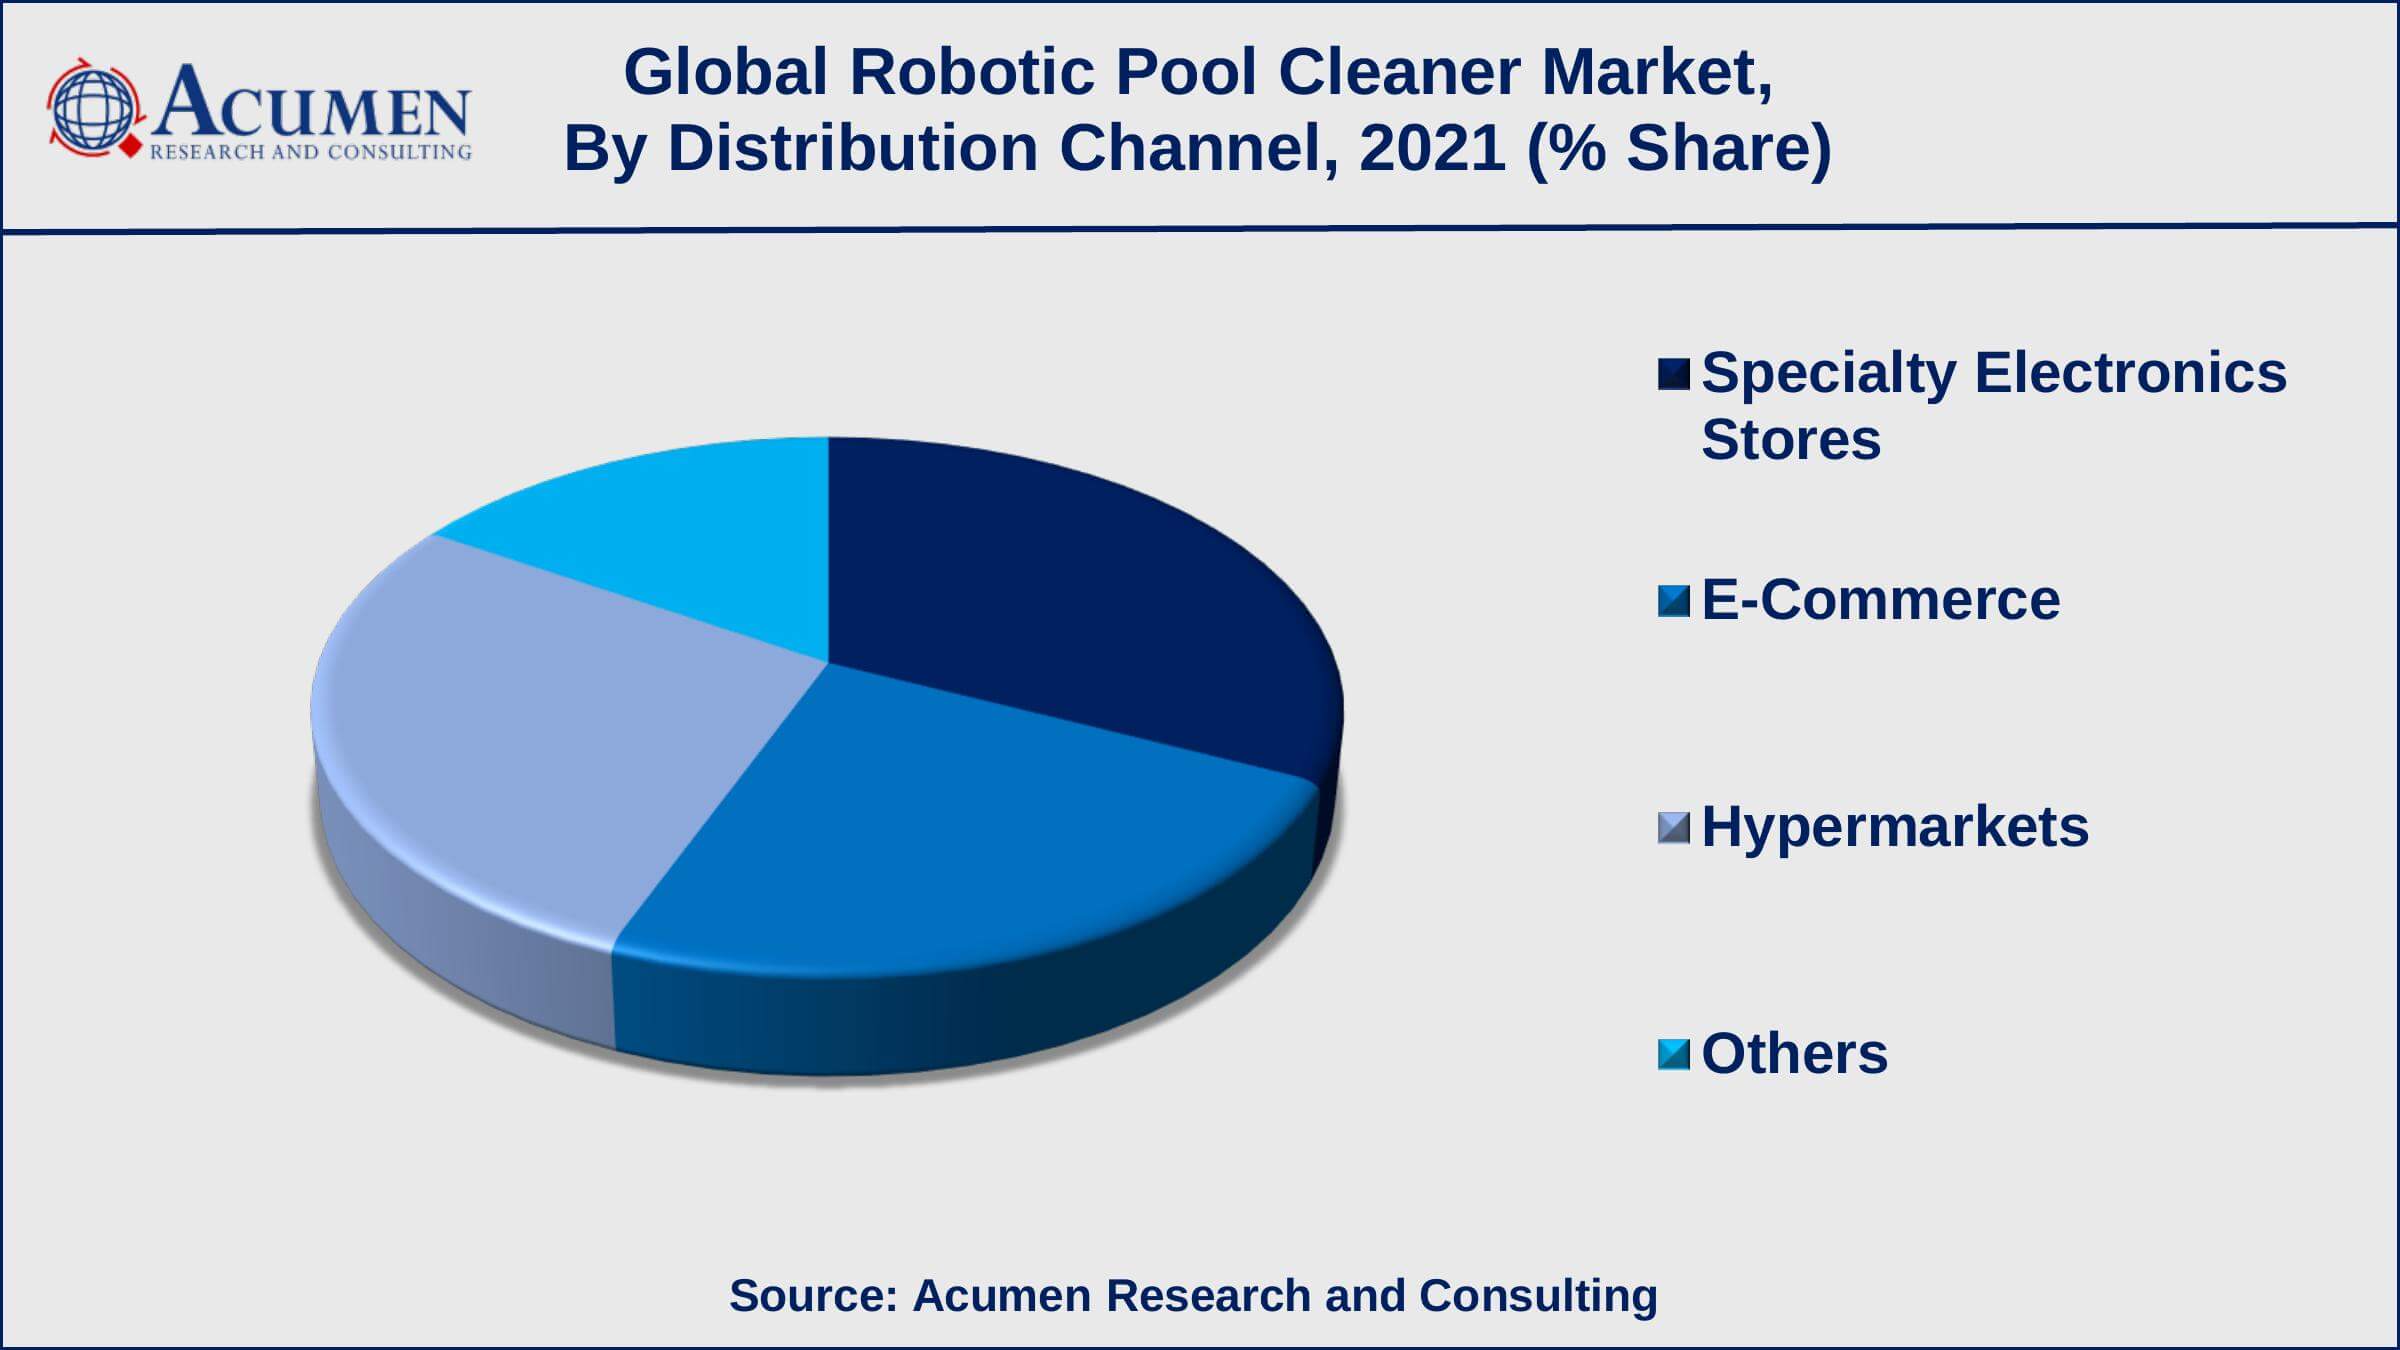 Among distribution channel, the specialty electronics stores sub-segment occupied USD 219.2 million in revenue in 2021